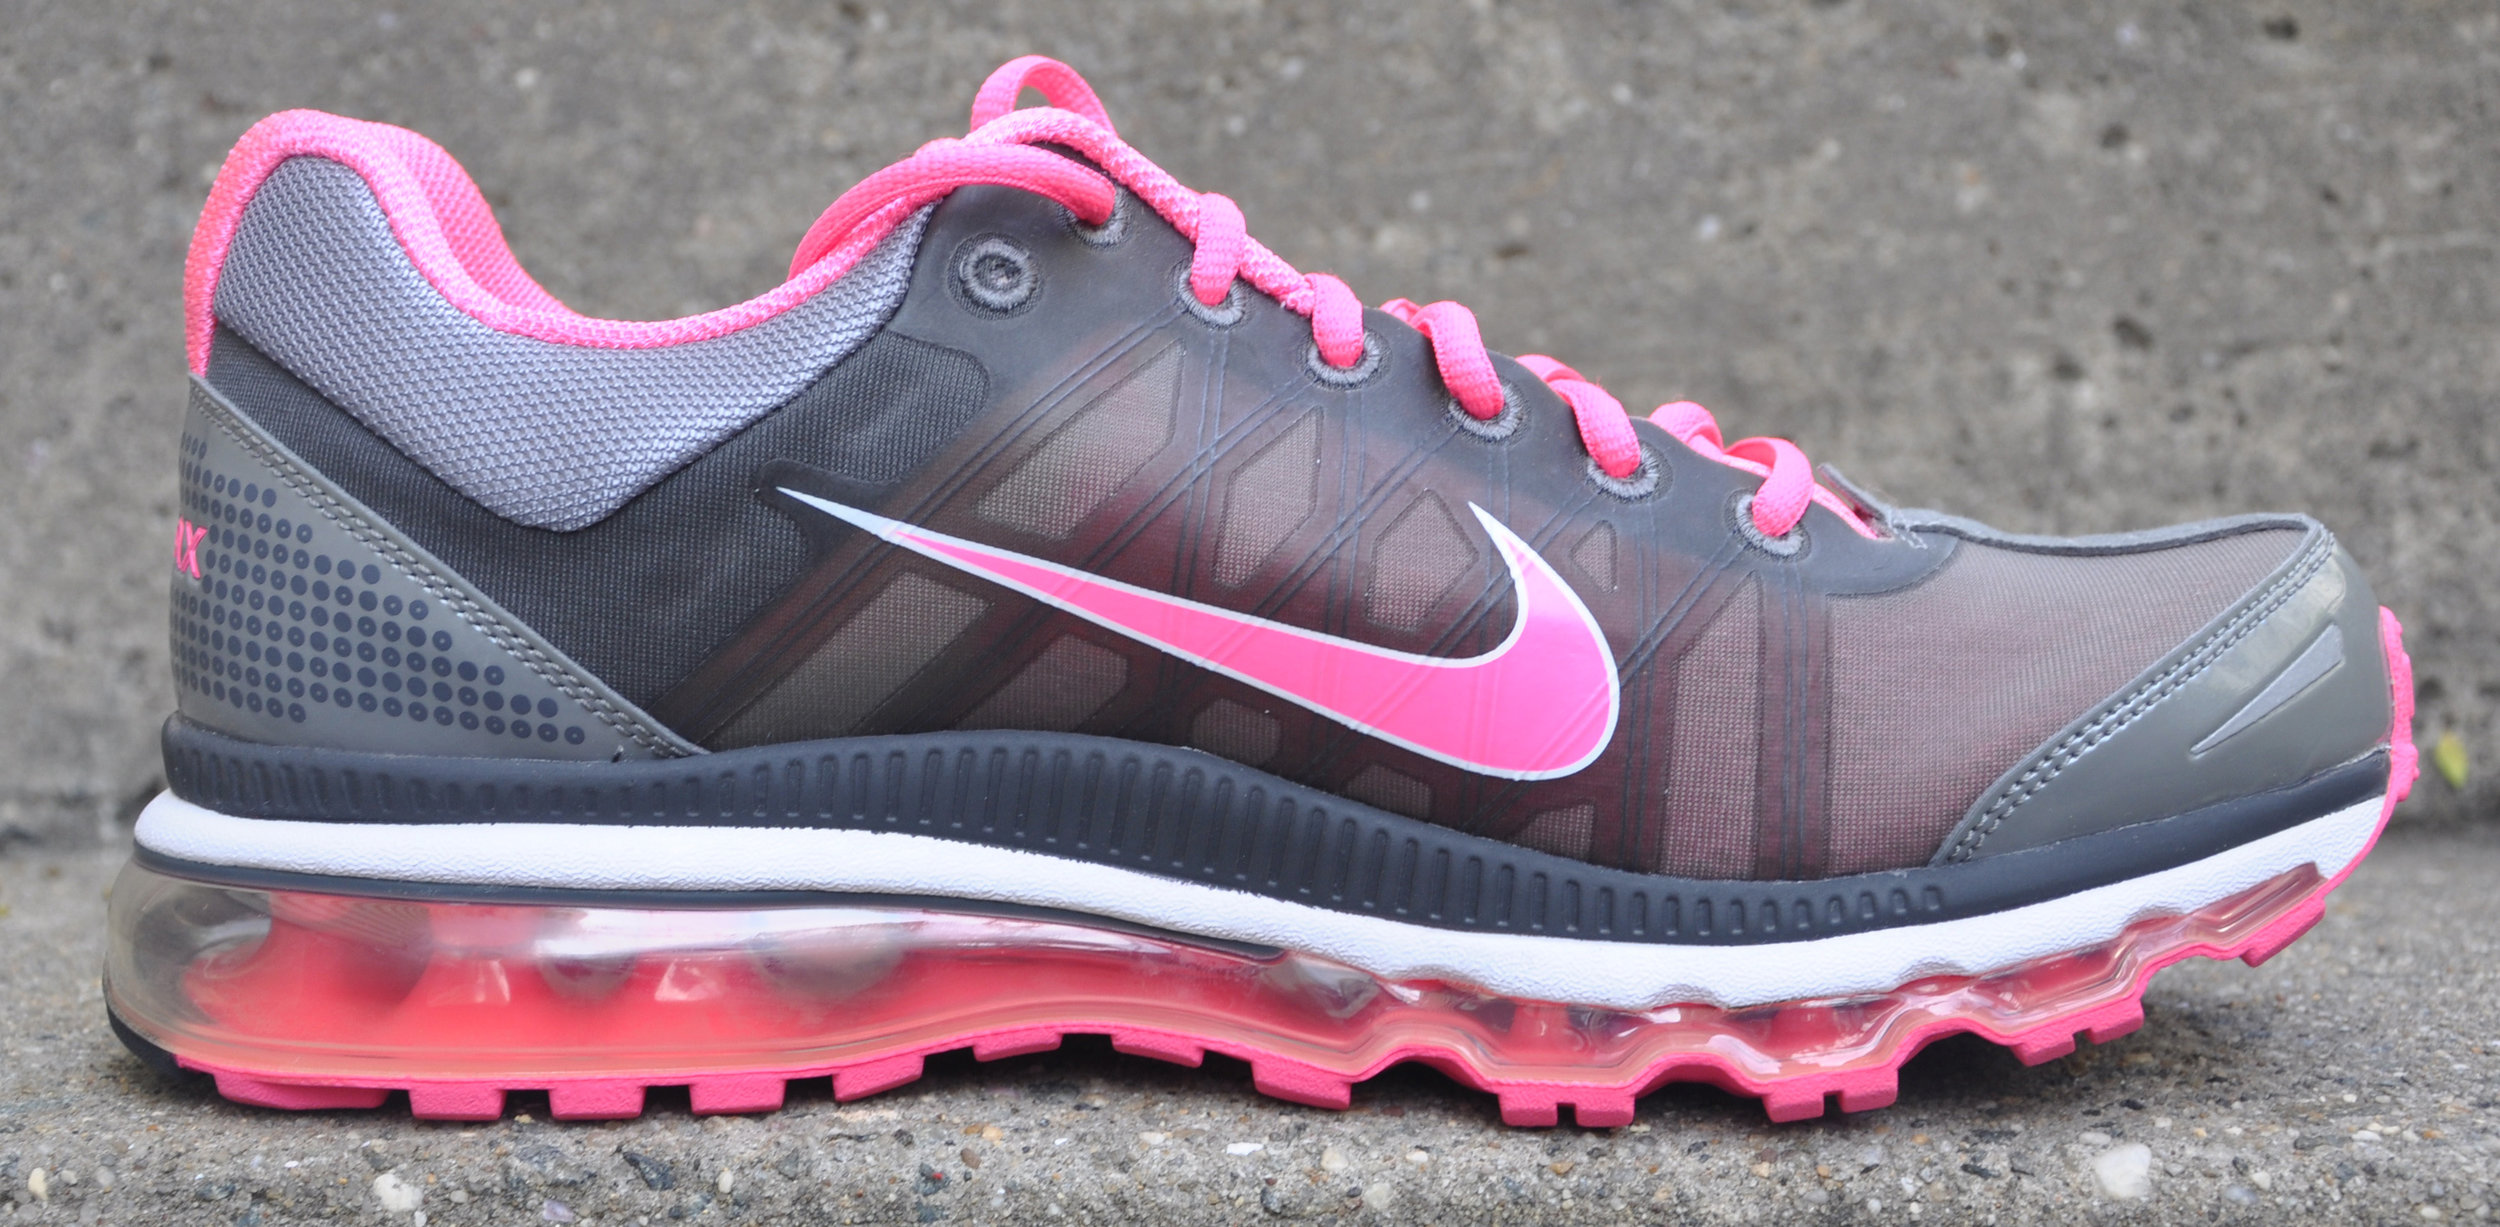 Sb-roscoffShops - cheap nike air max 2009 for women shoes sale